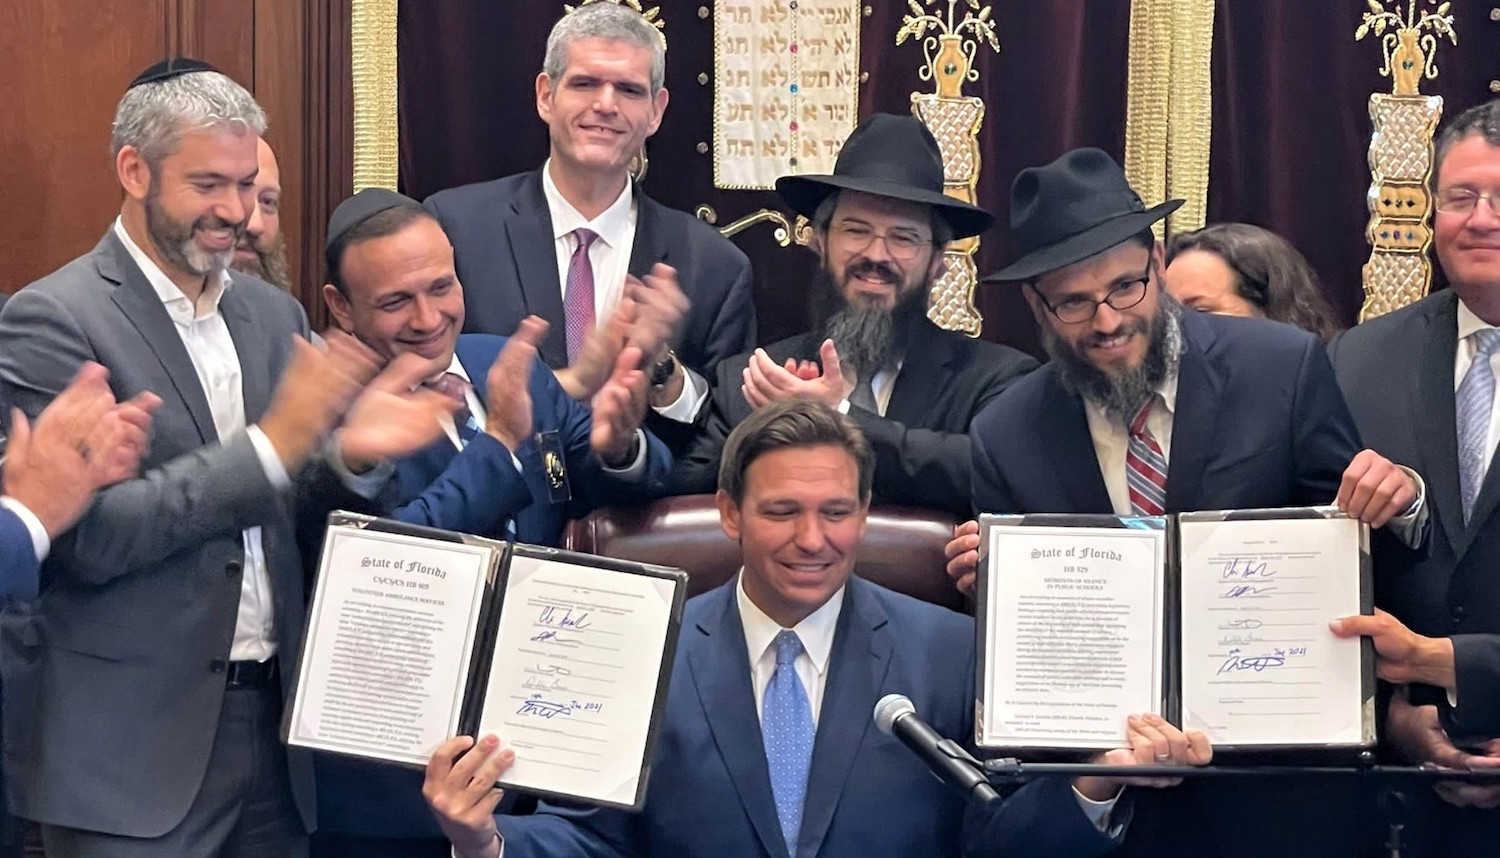 Judea and Samaria are not ‘occupied’ but ‘disputed,’ says DeSantis